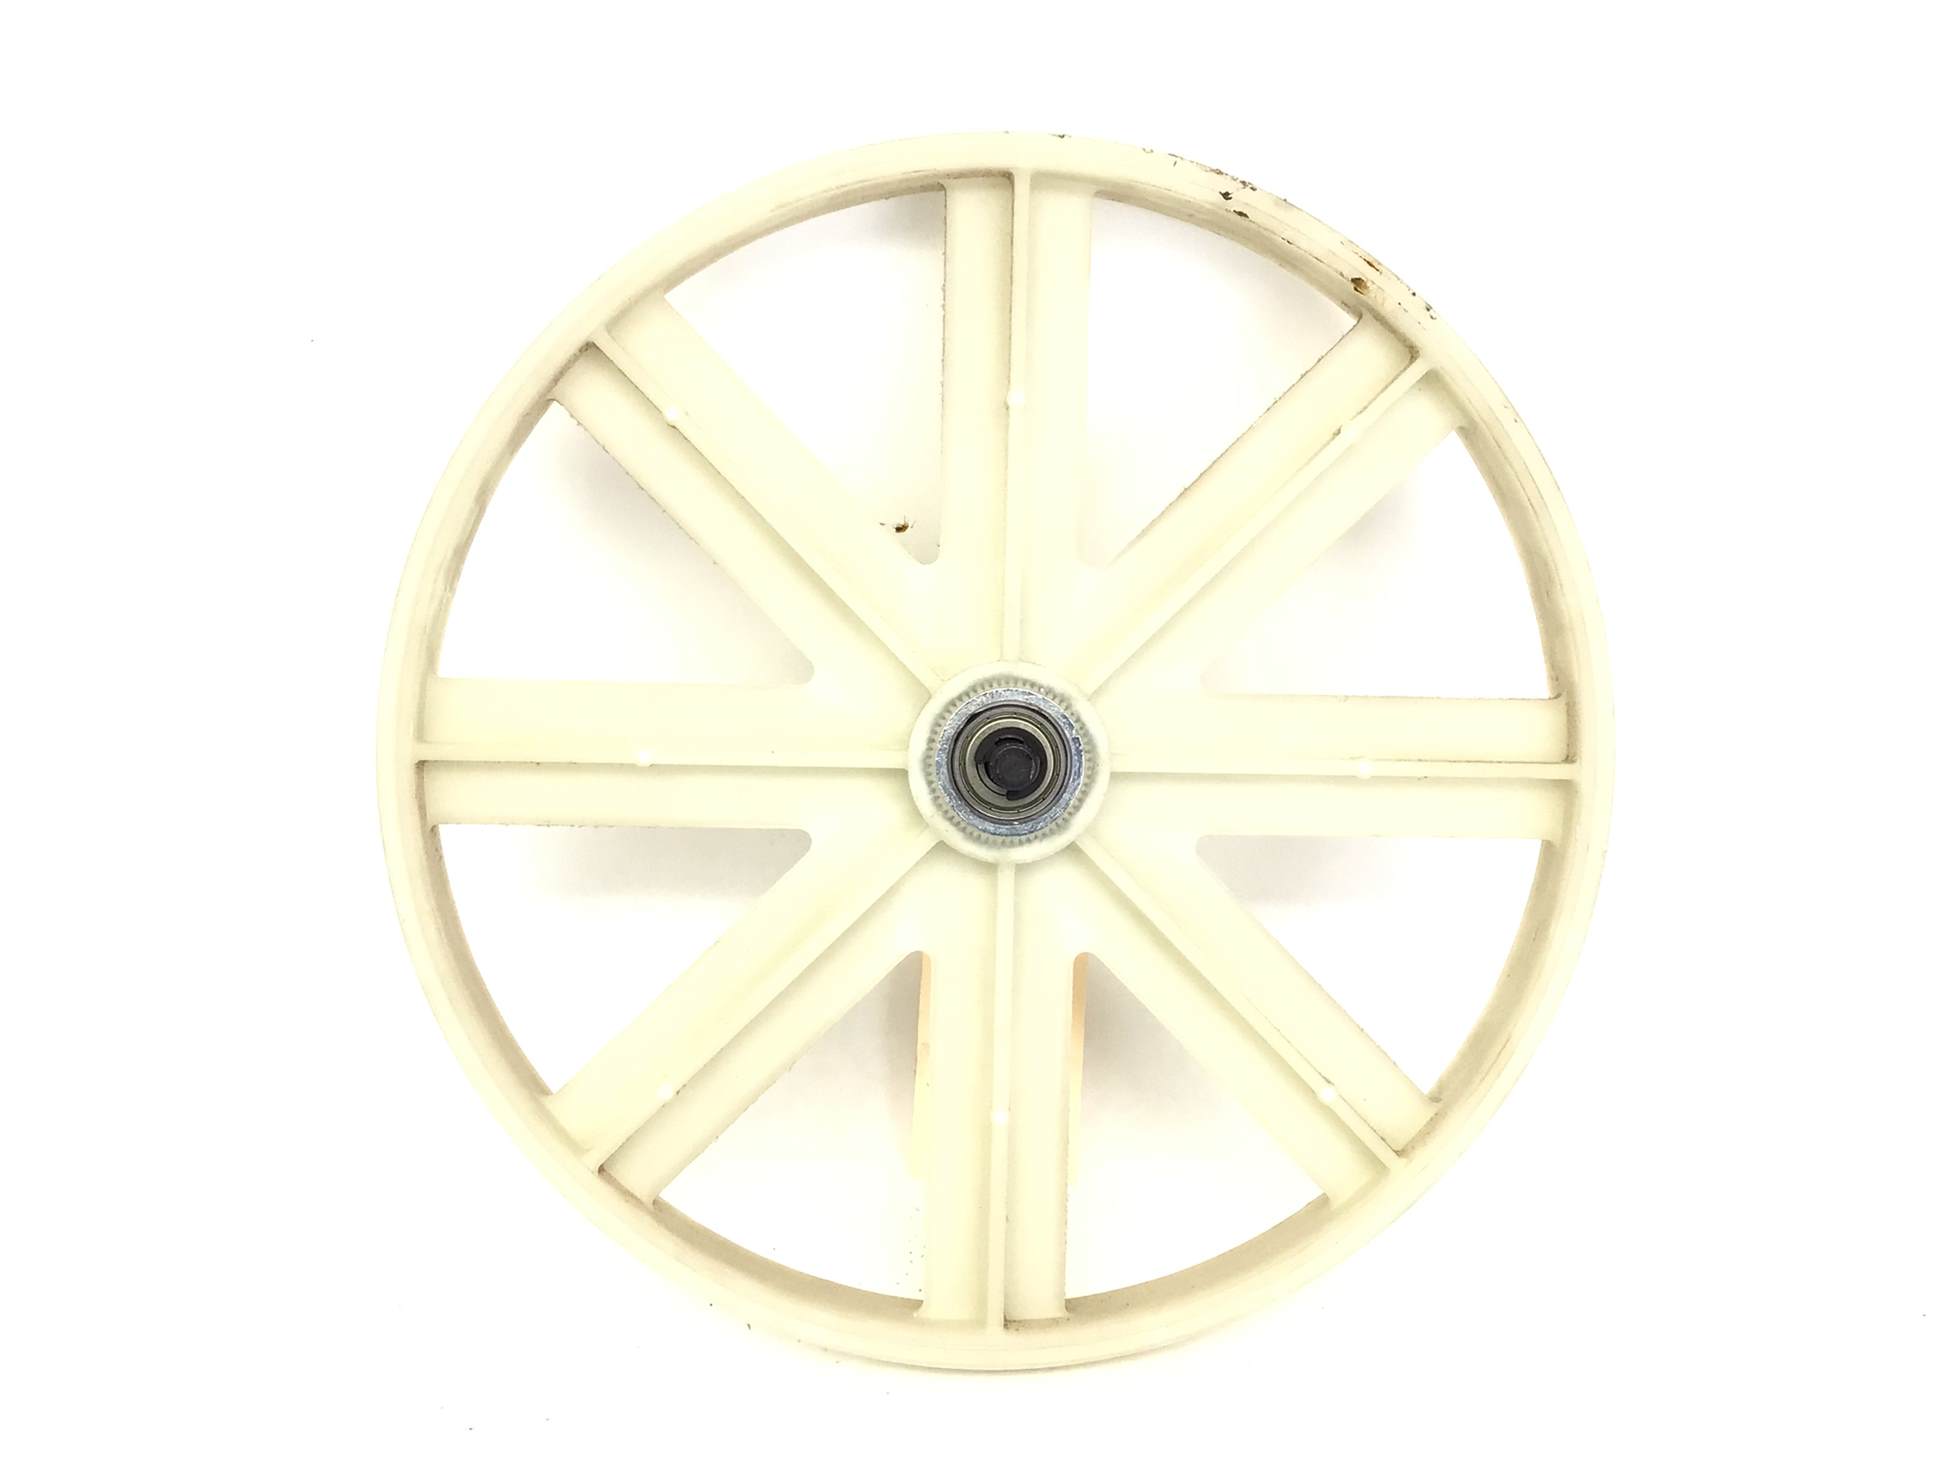 Freewheel Pulley Assembly (Used)